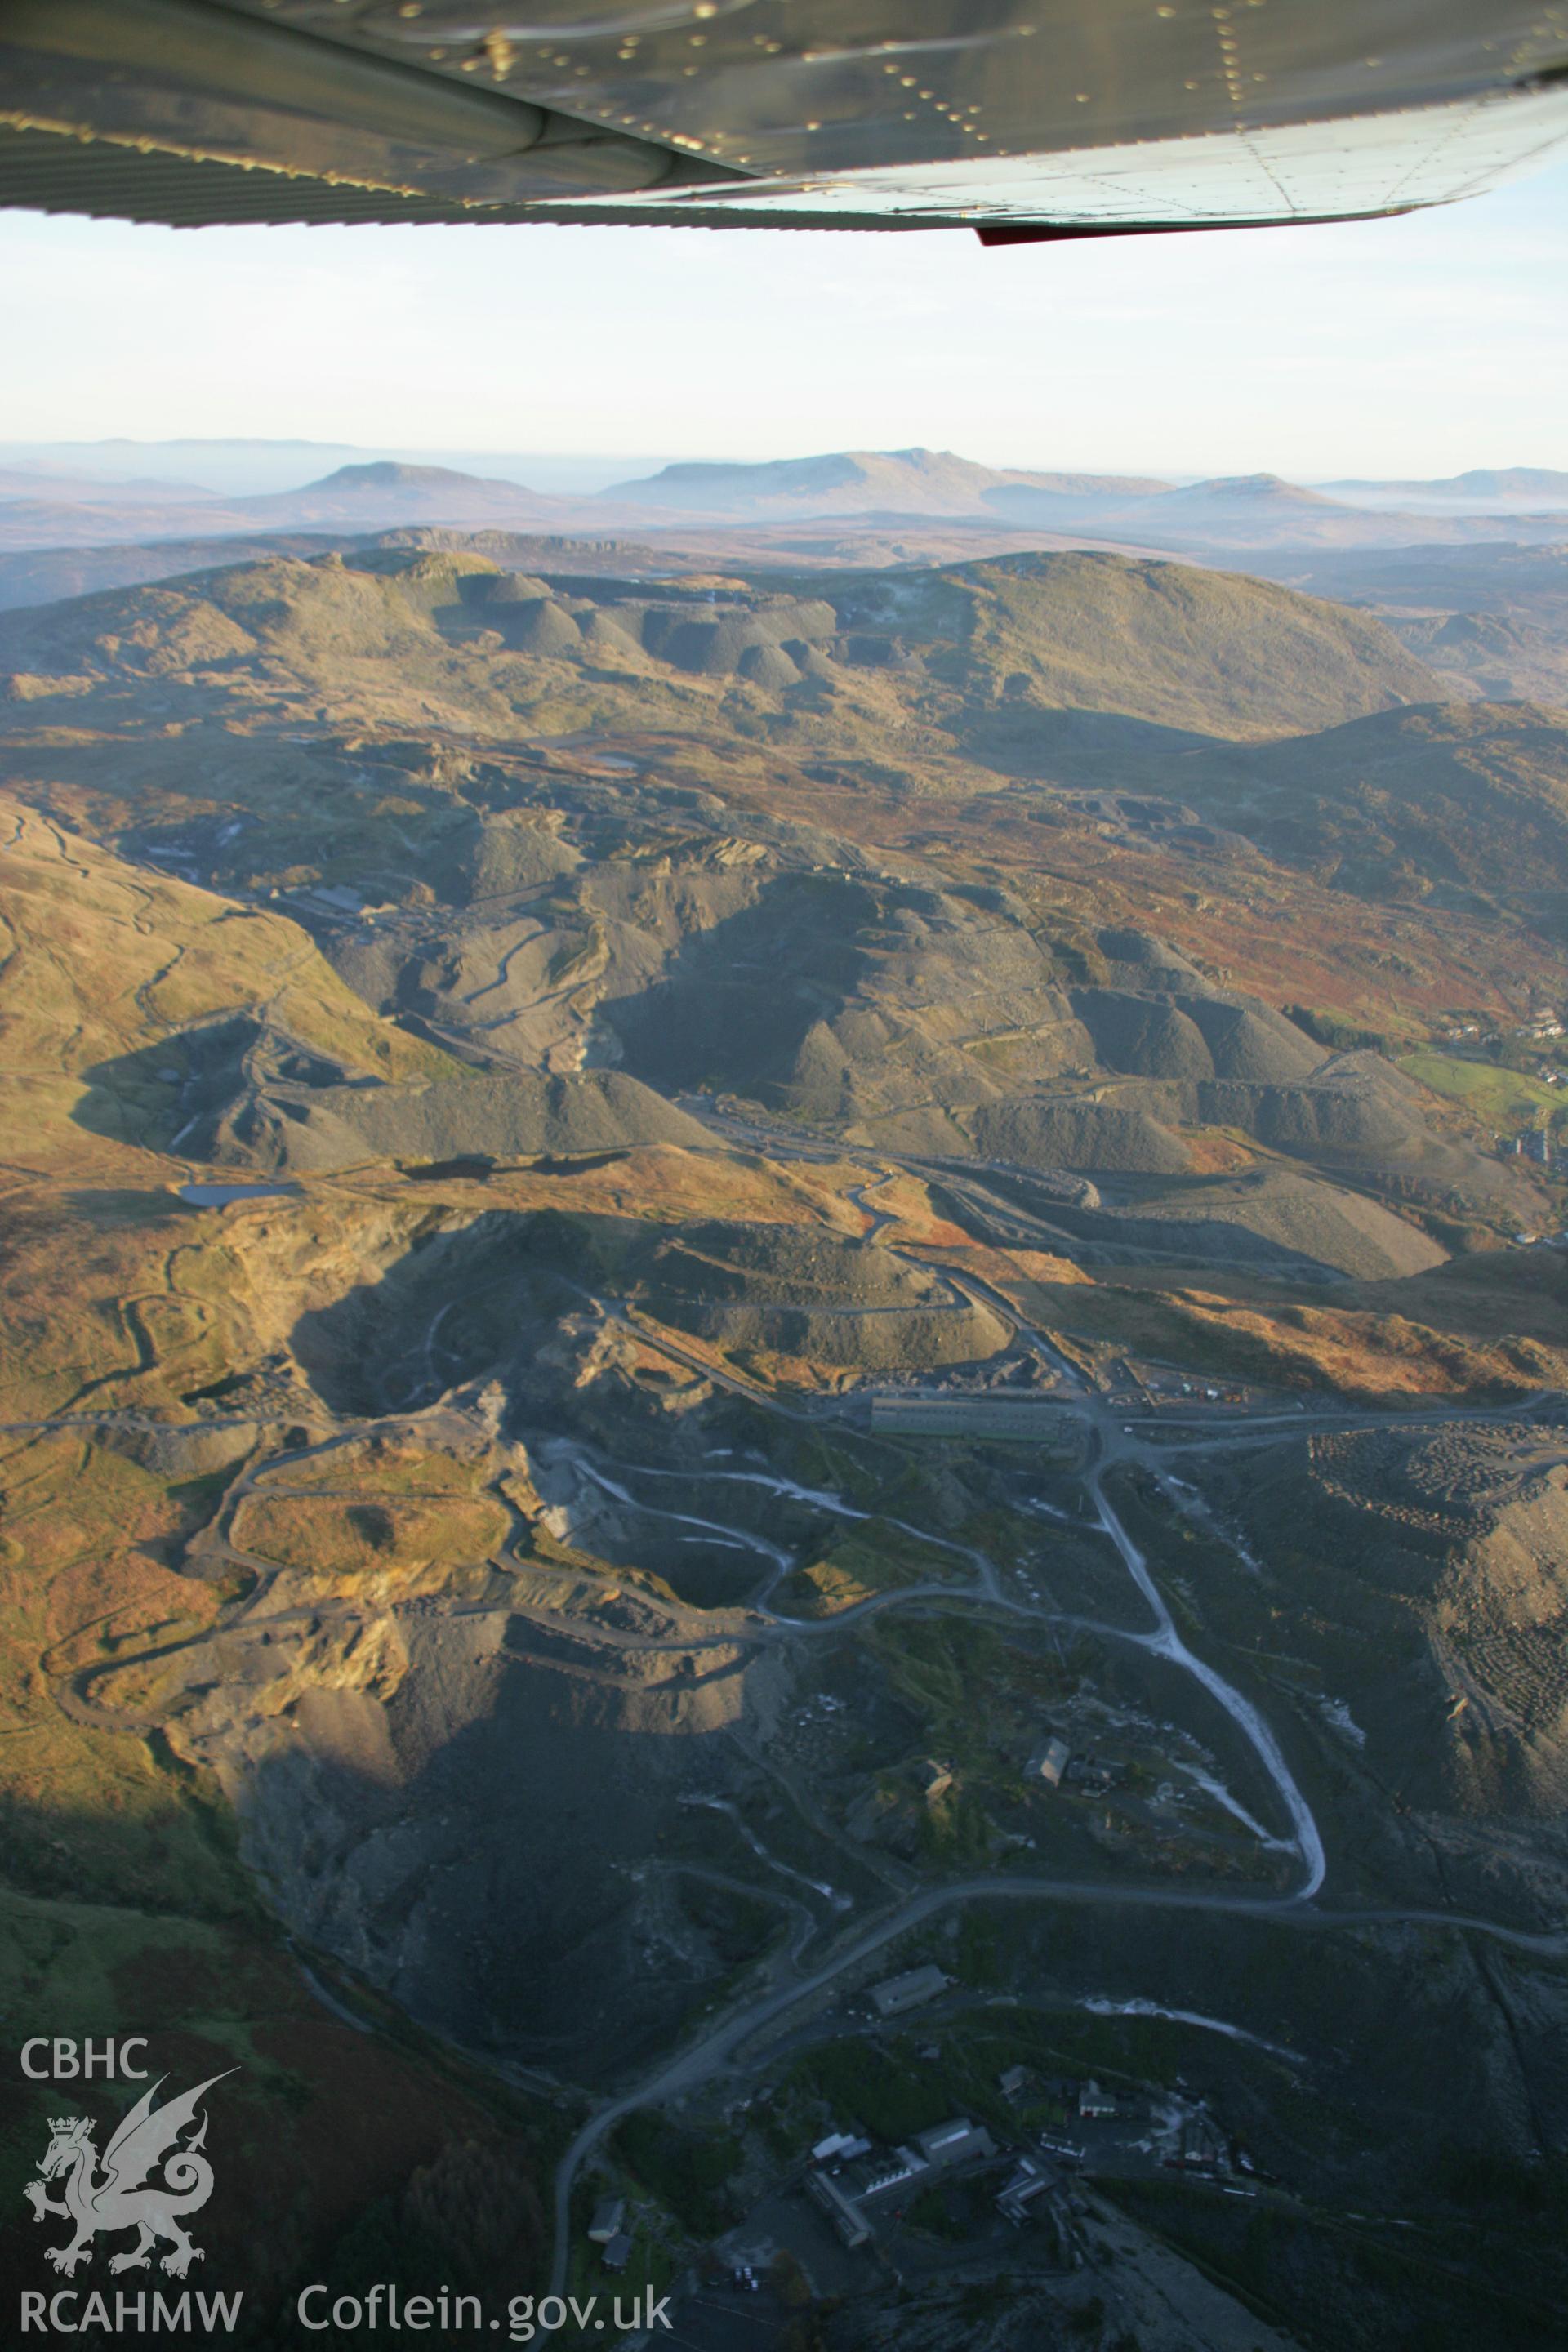 RCAHMW colour oblique aerial photograph of Maen-Offeren Slate Quarry, Blaenau Ffestiniog, viewed from the west. Taken on 21 November 2005 by Toby Driver